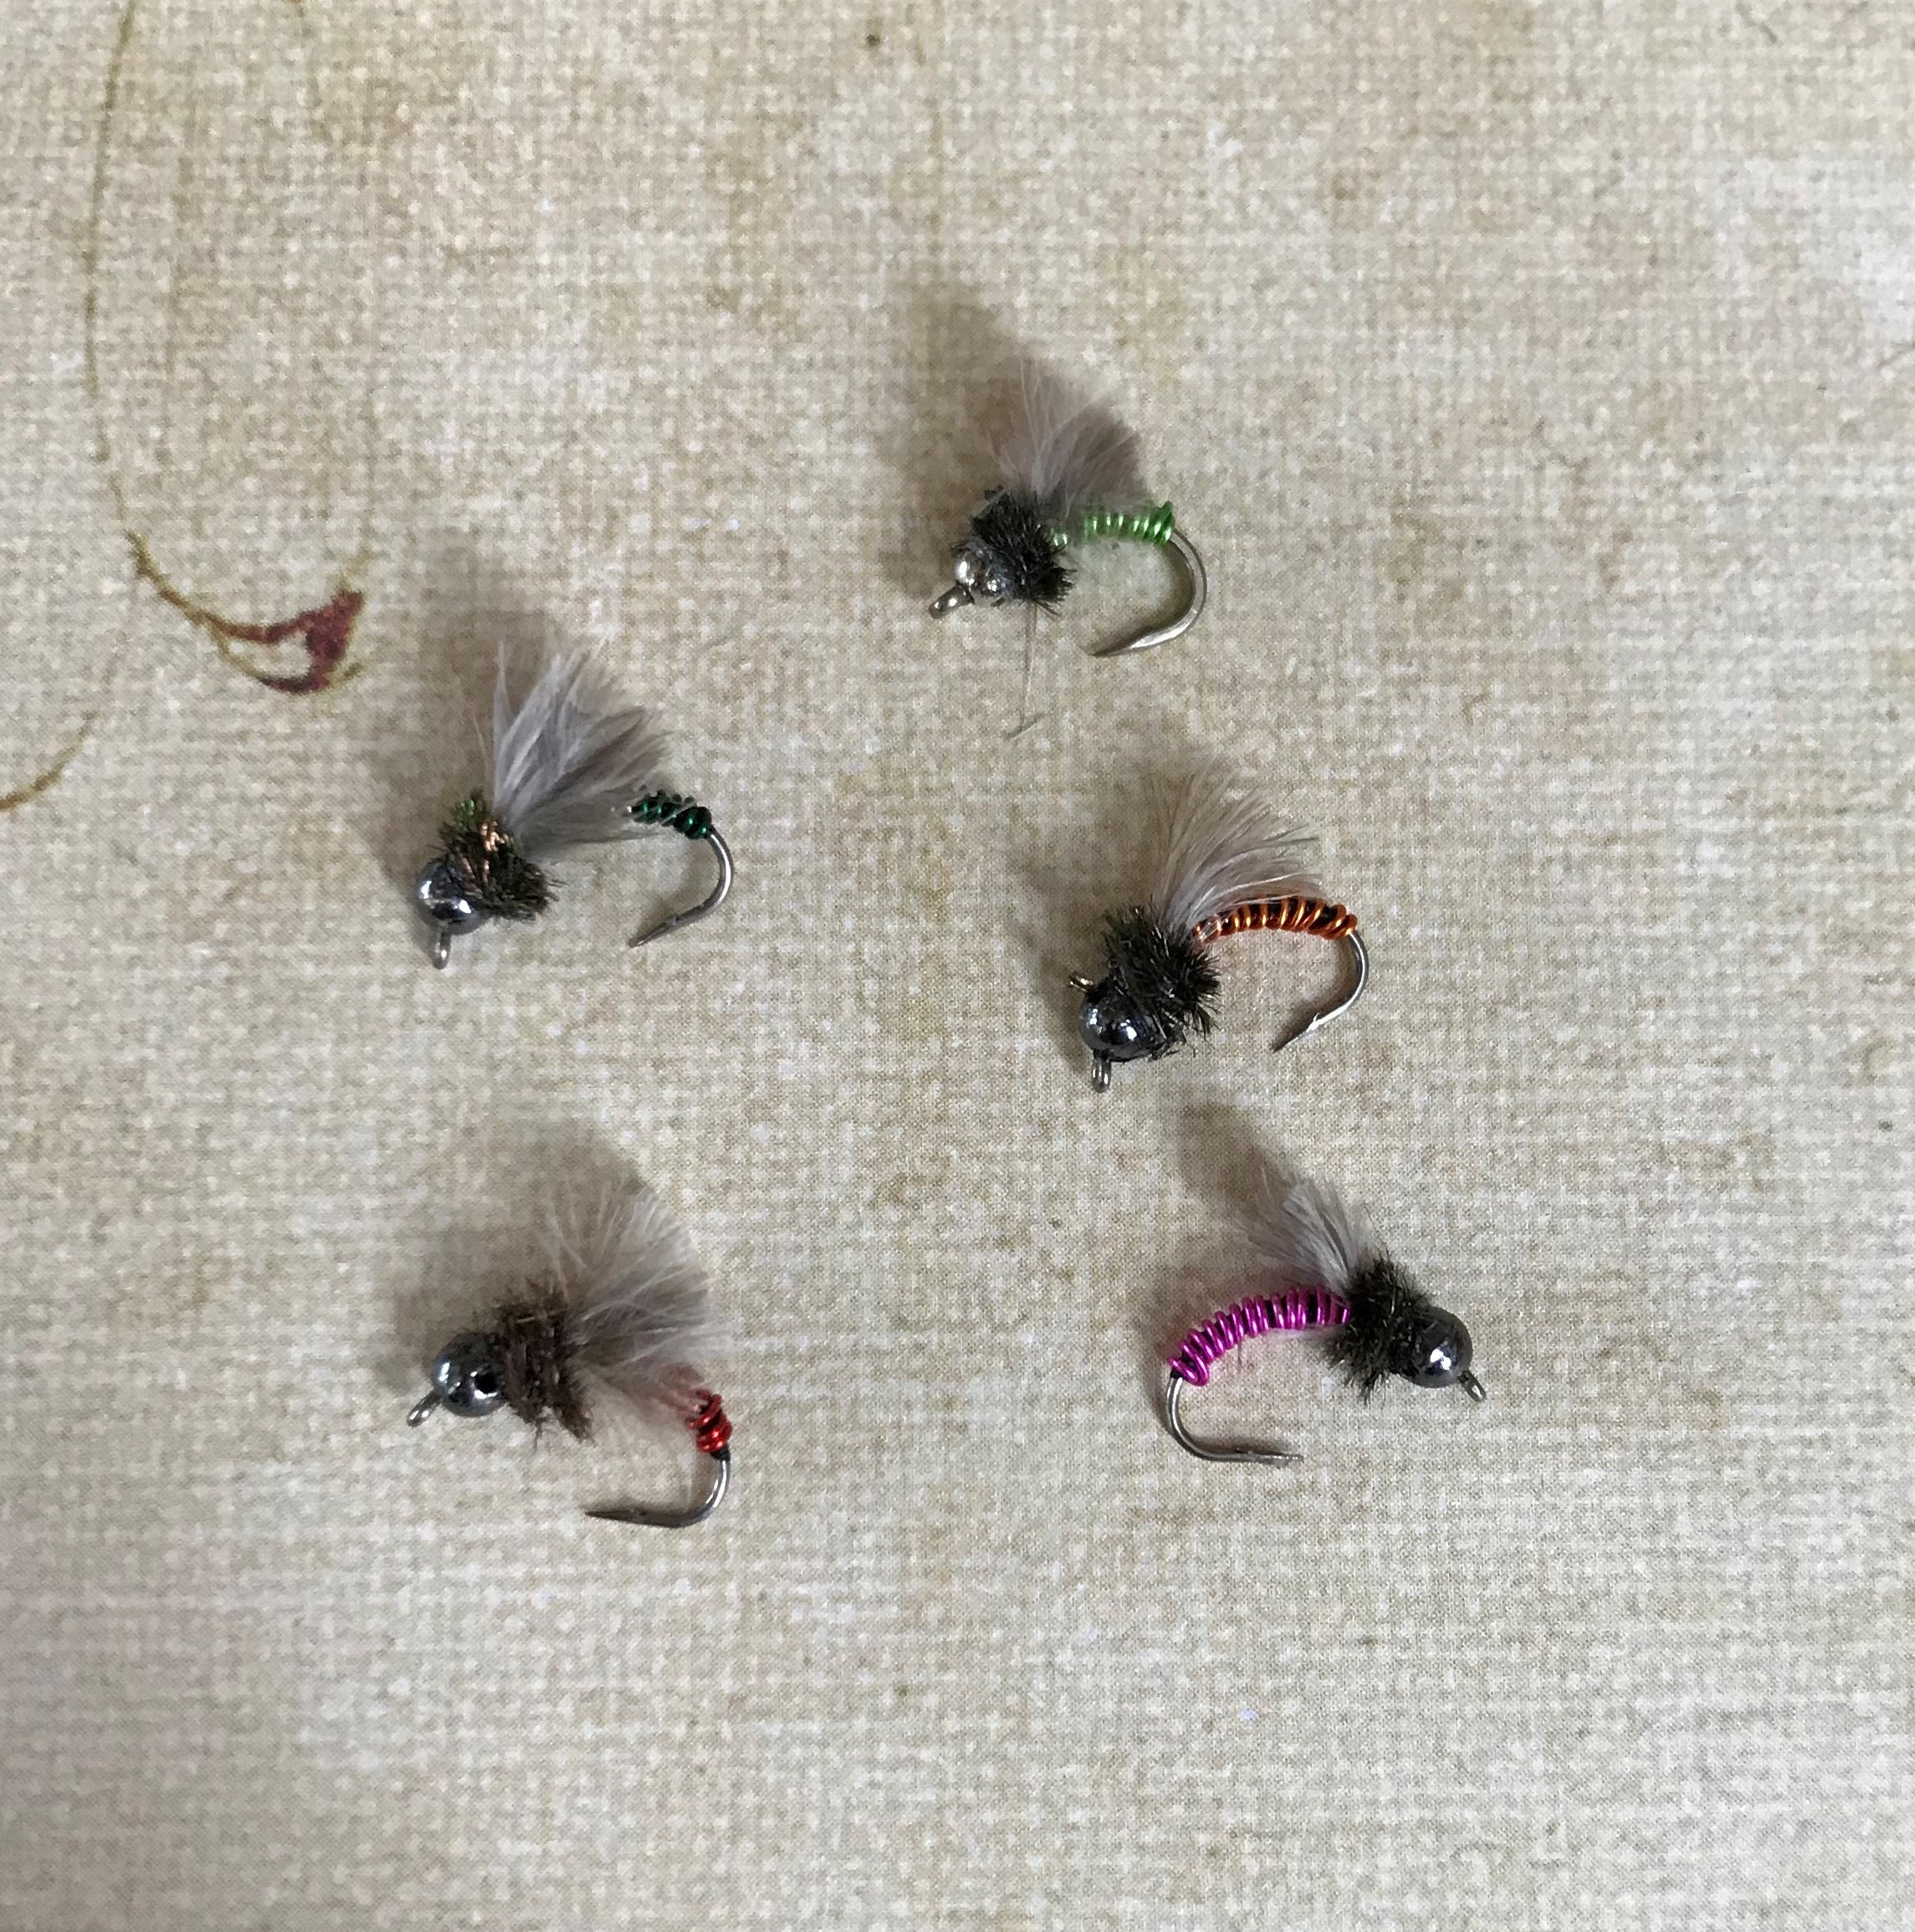 Trout Flies, Hand Tied Trout Flies, Fly Fishing Gift for Men, Trout Fly  Fishing Flies, Caddis Emerger, psycho Emergers, Set of 5 